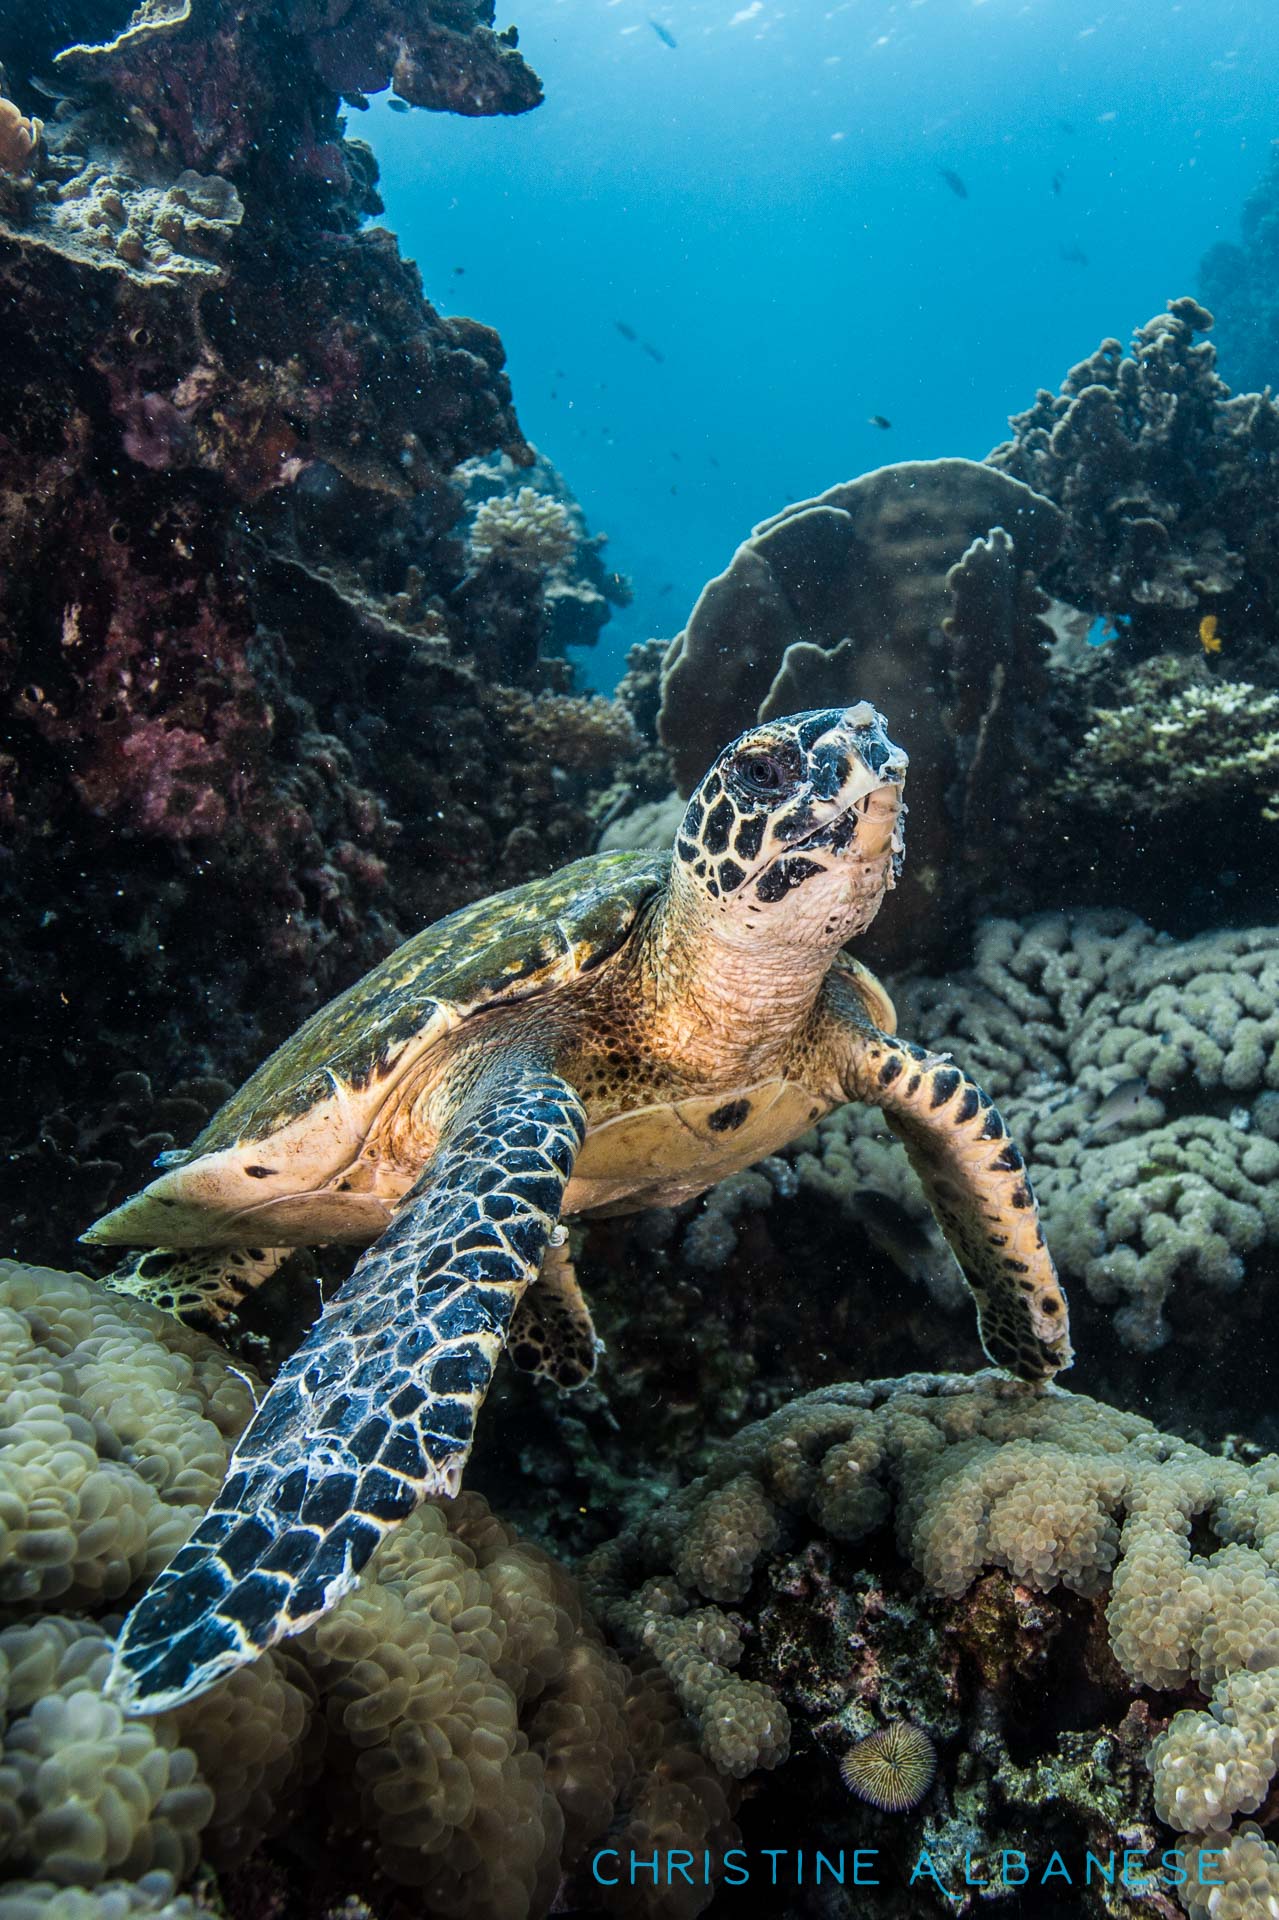 A small young hawksbill turtle was spotted at Japanese Gardens - he frequents this dive site and is usually found munching away on bubble coral. He finally took a "breather" and posed for me :)

#underwater #underwaterphotography #uwphotography #EarthCapture #padi #wideangle #canon6d #canon1740 #ikelite #ds160 #scuba #scubadiving #adventure #kohtao #thailand #divinglife #lovemyjob #japanesegarden #turtle #hawksbill #cutie #poser